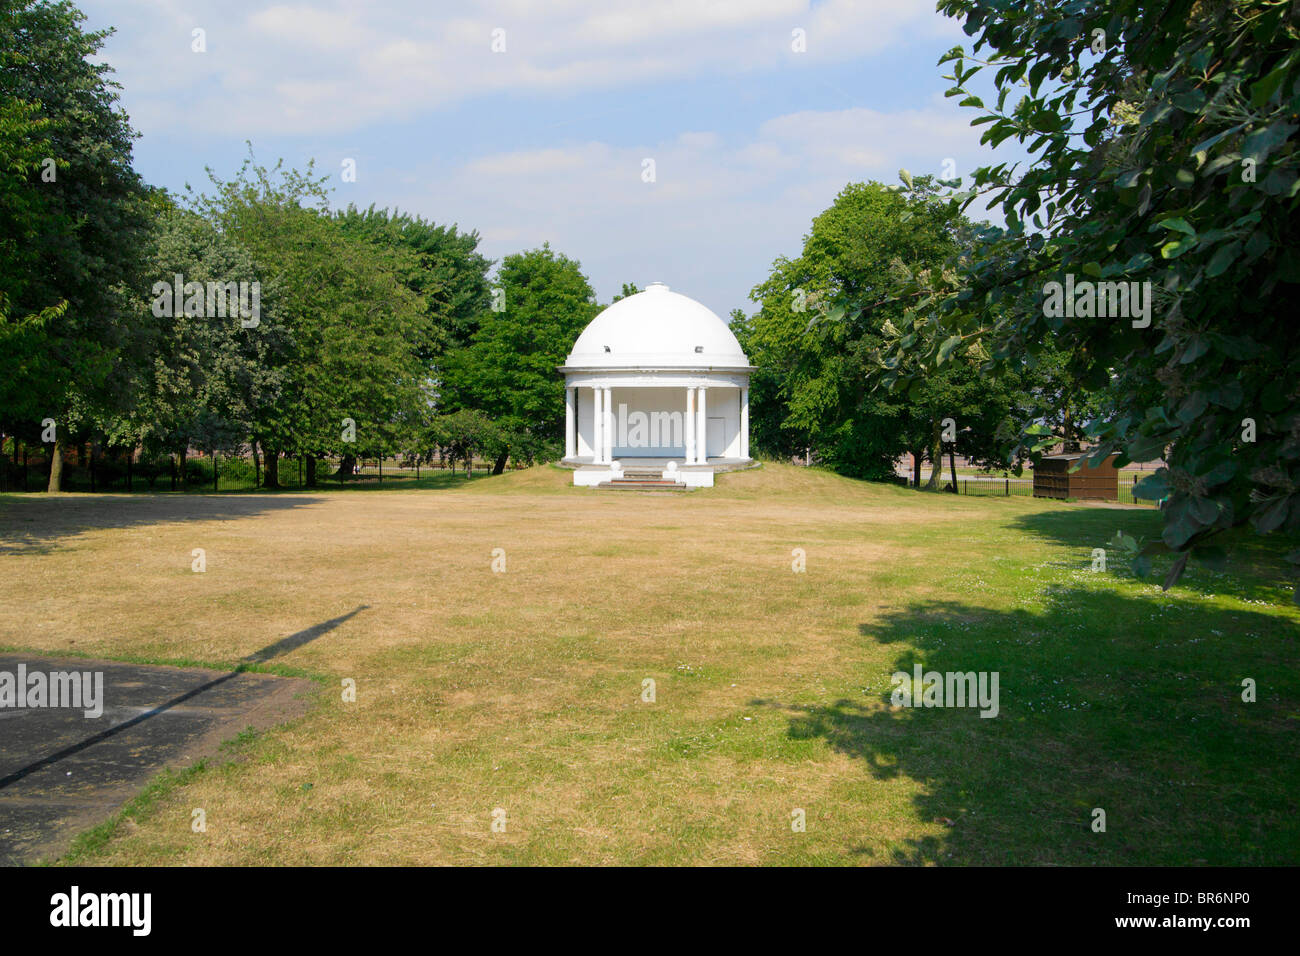 Vale Park bandstand Wallasey, Merseyside. Stock Photo